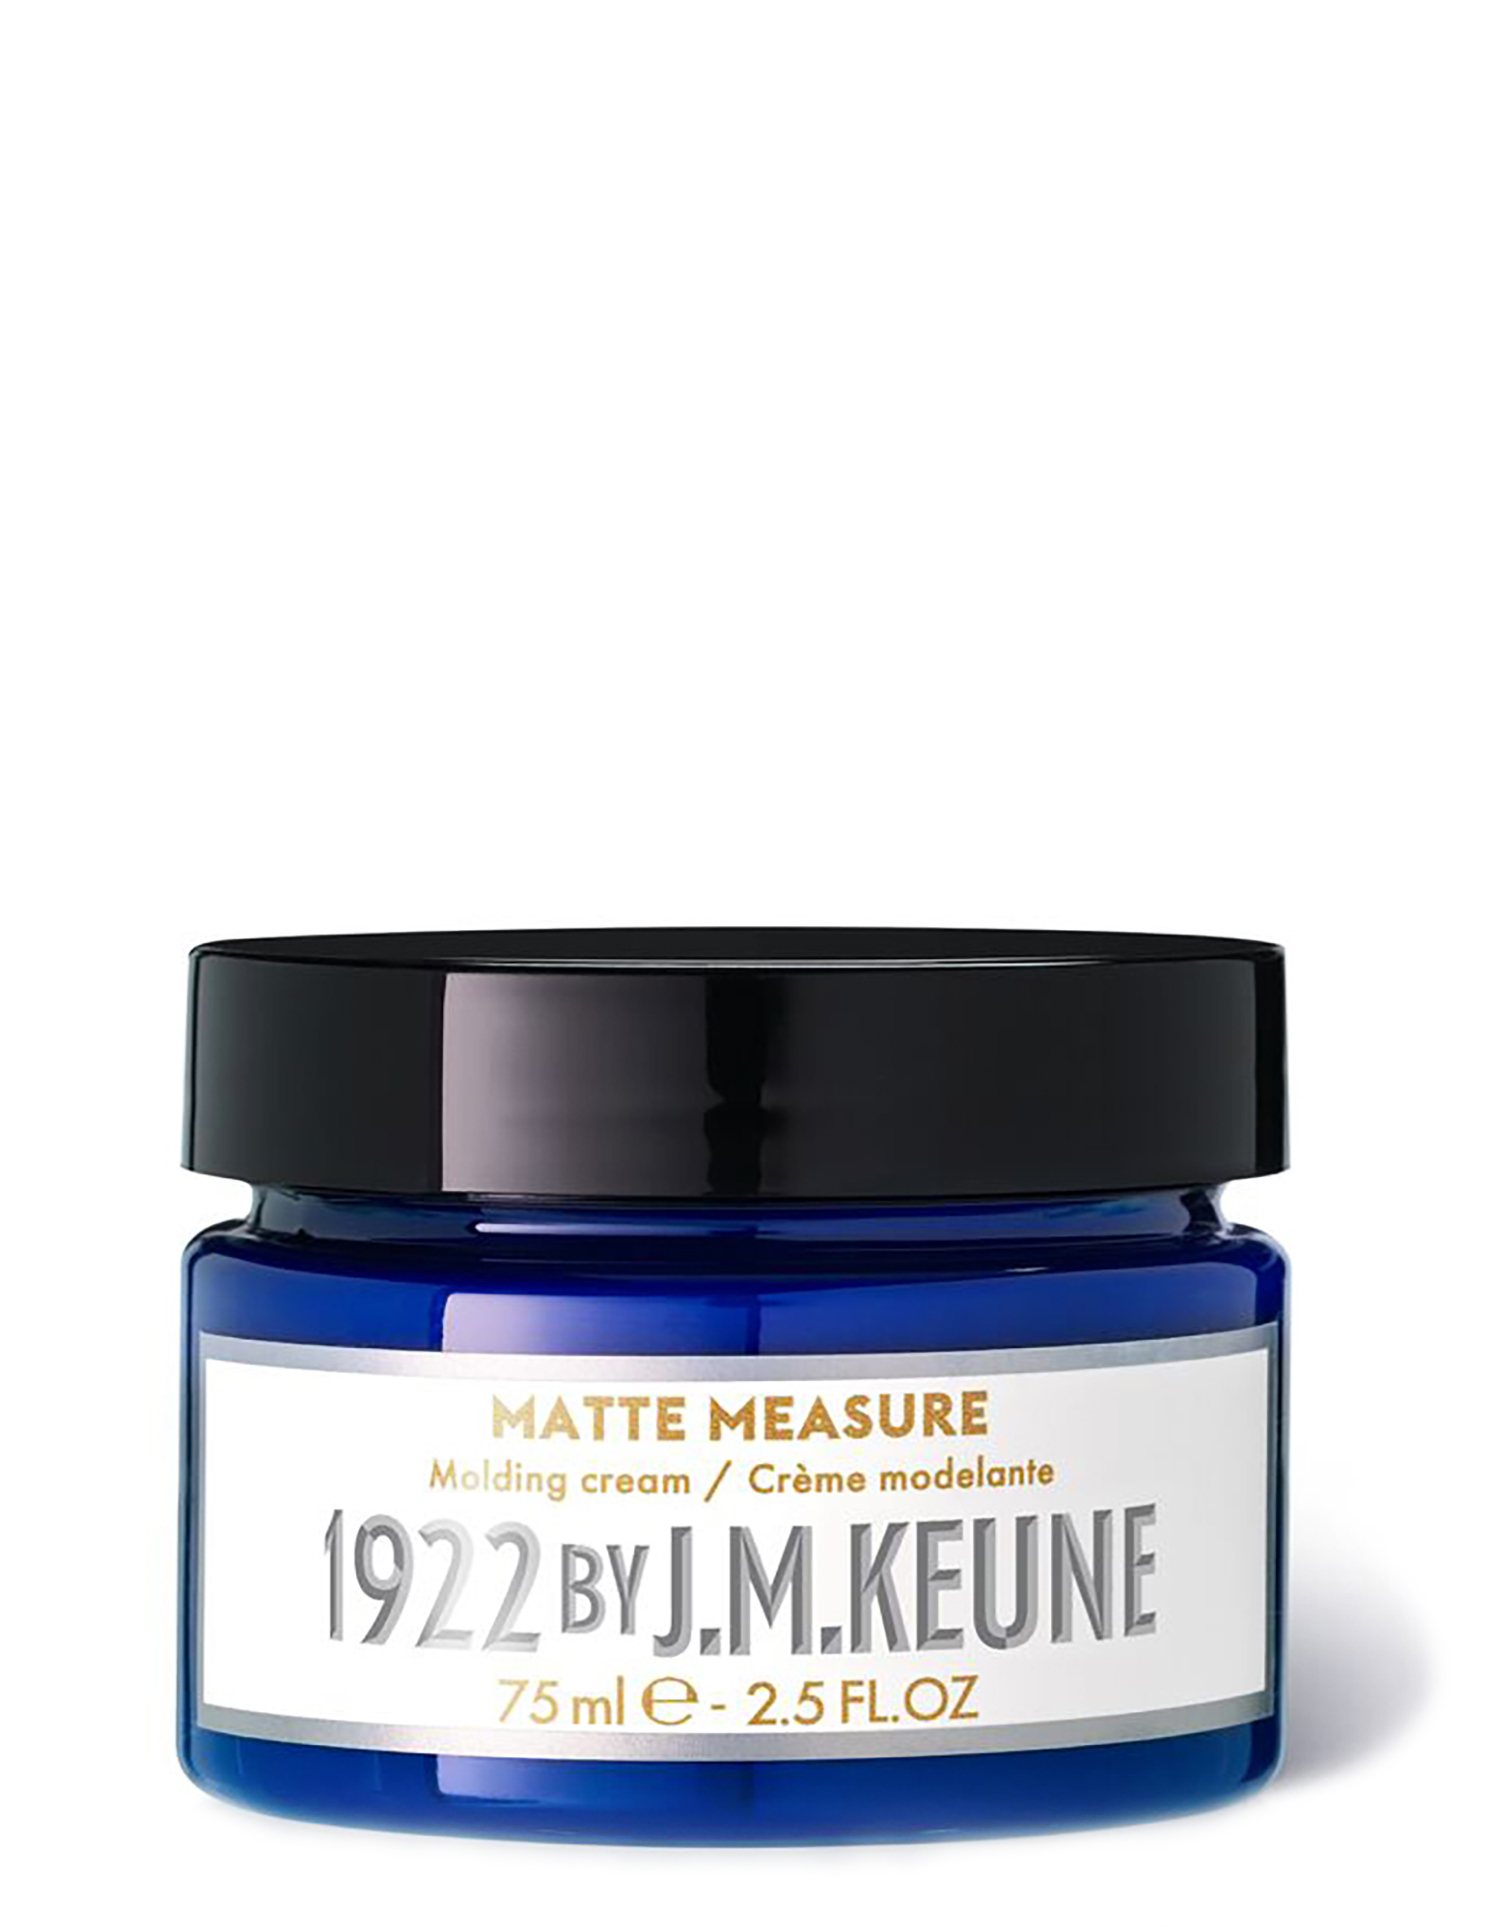 Discover 1922 MATTE MEASURE: Molding cream for men, medium hold, matte finish. Ideal for textured looks, restylable all day. Hairproduckts for men on keune.ch.